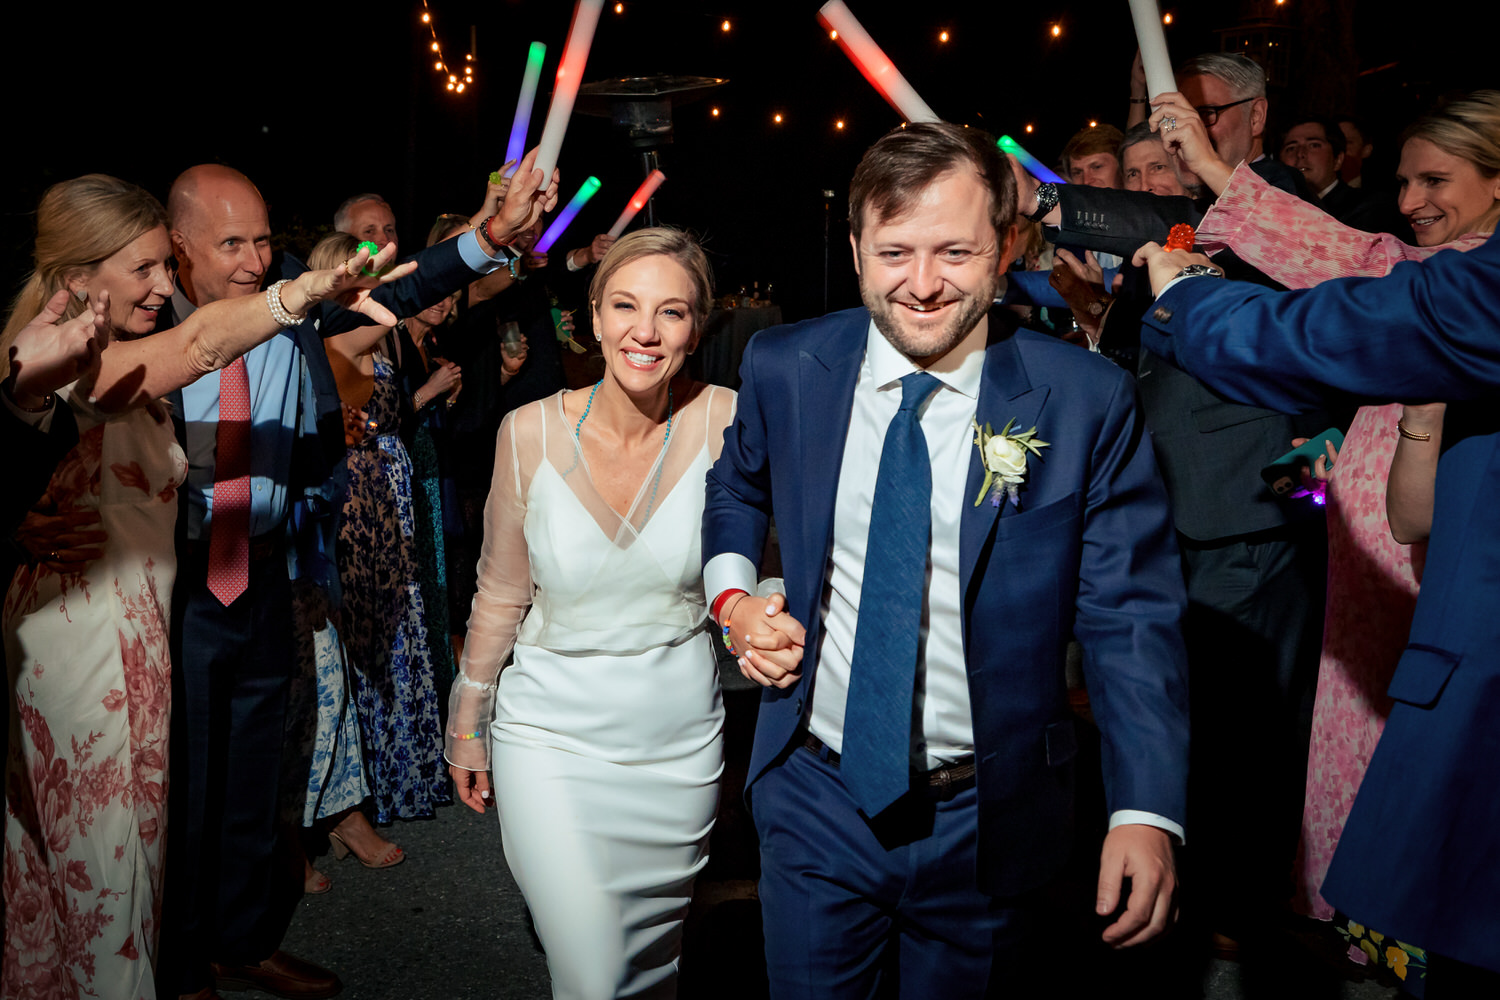 LED foam party sticks frame a couple's exit from their wedding reception.